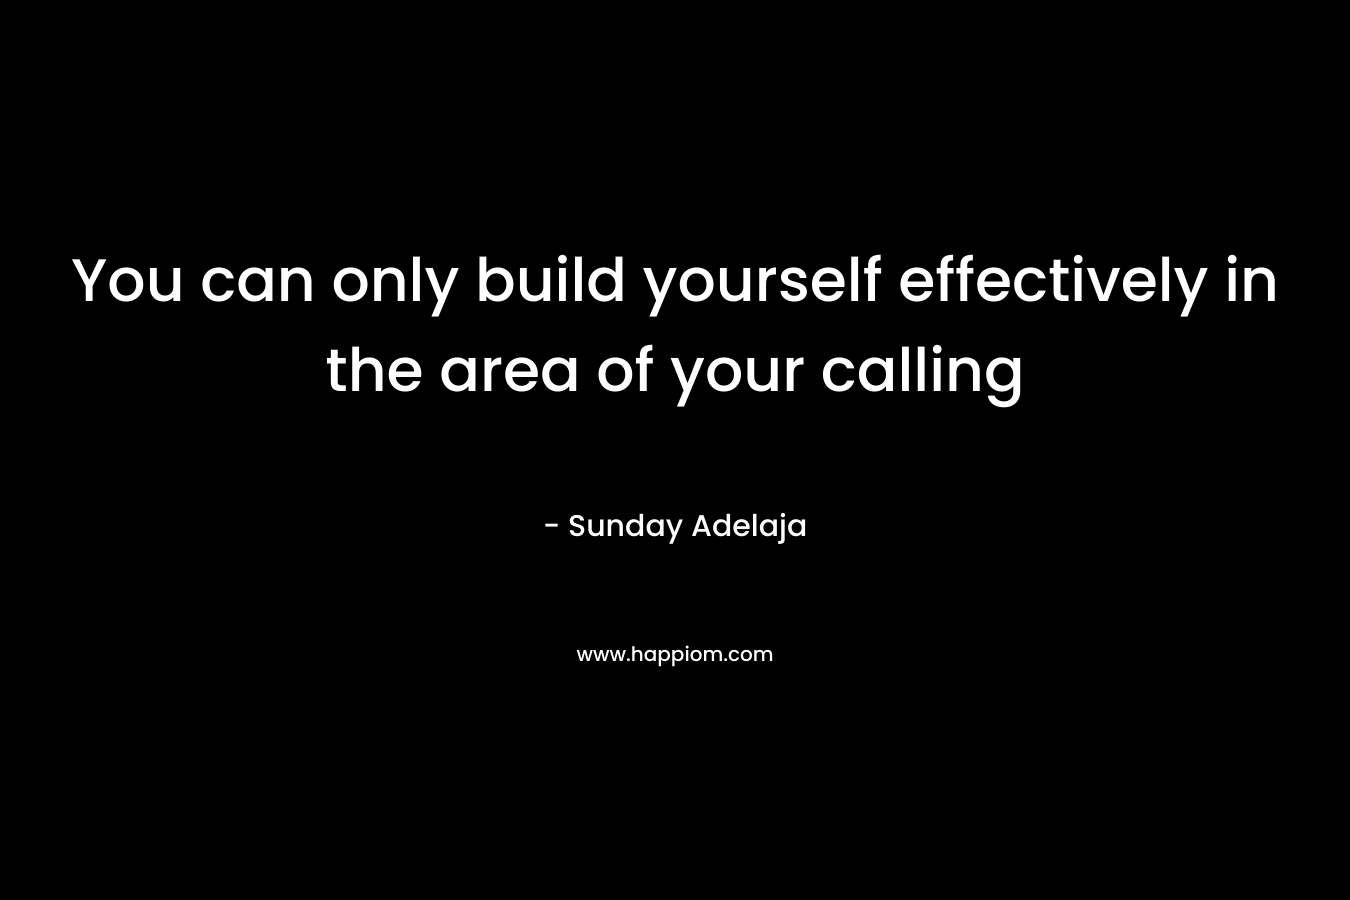 You can only build yourself effectively in the area of your calling